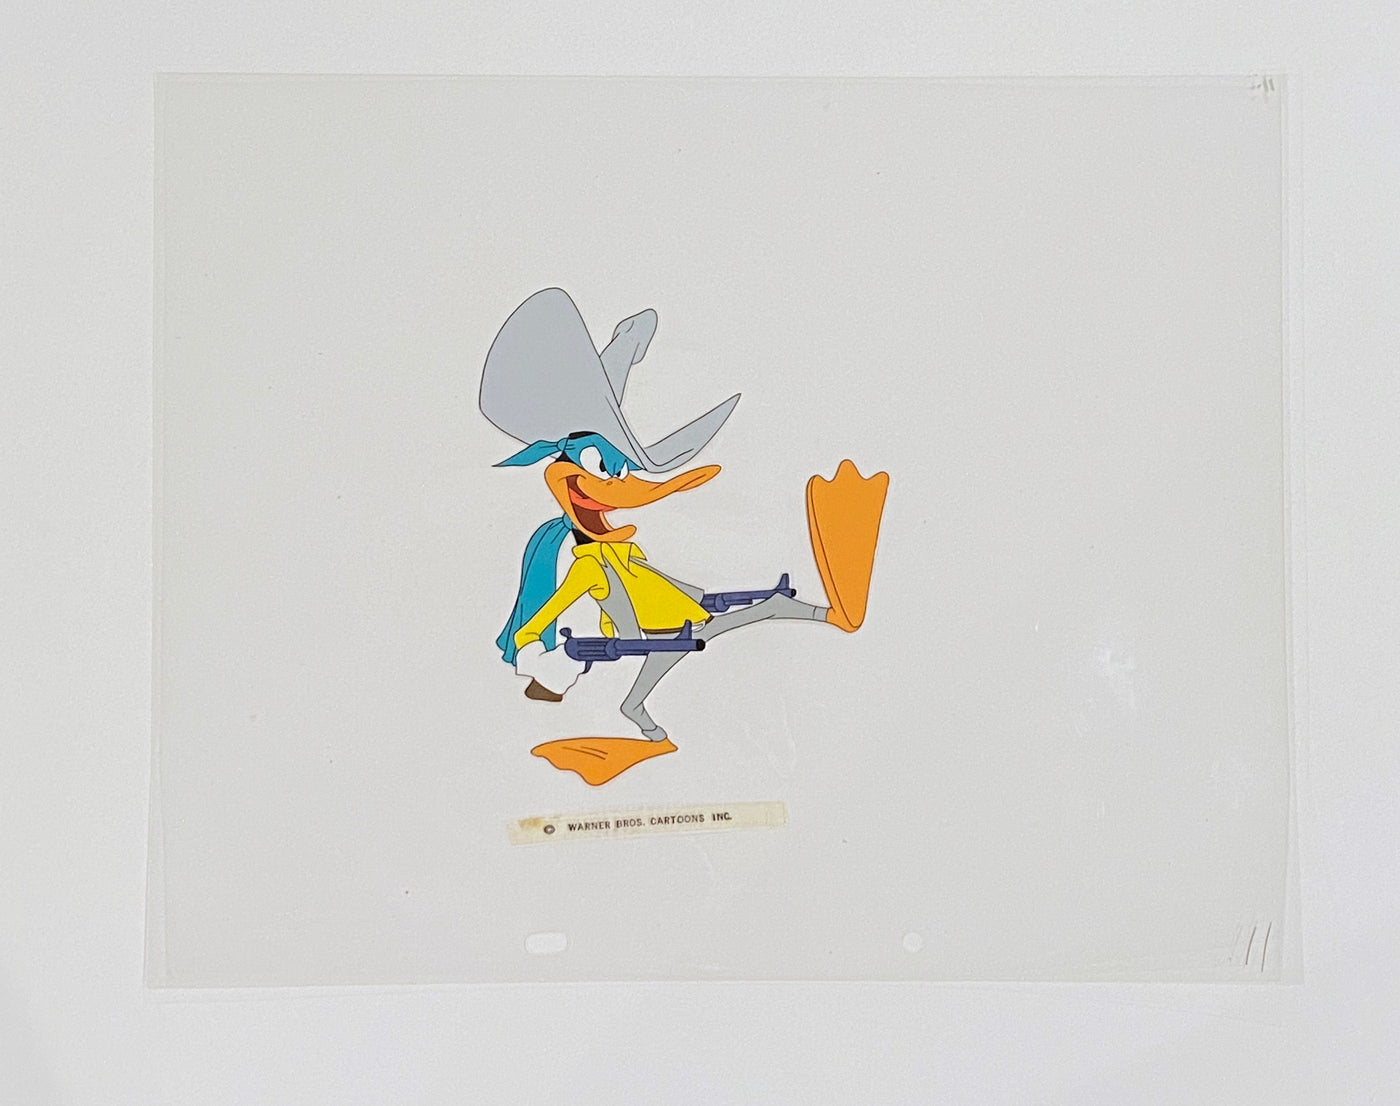 Original Warner Brothers Production Cel of Daffy Duck from My Little Duckaroo (1954)